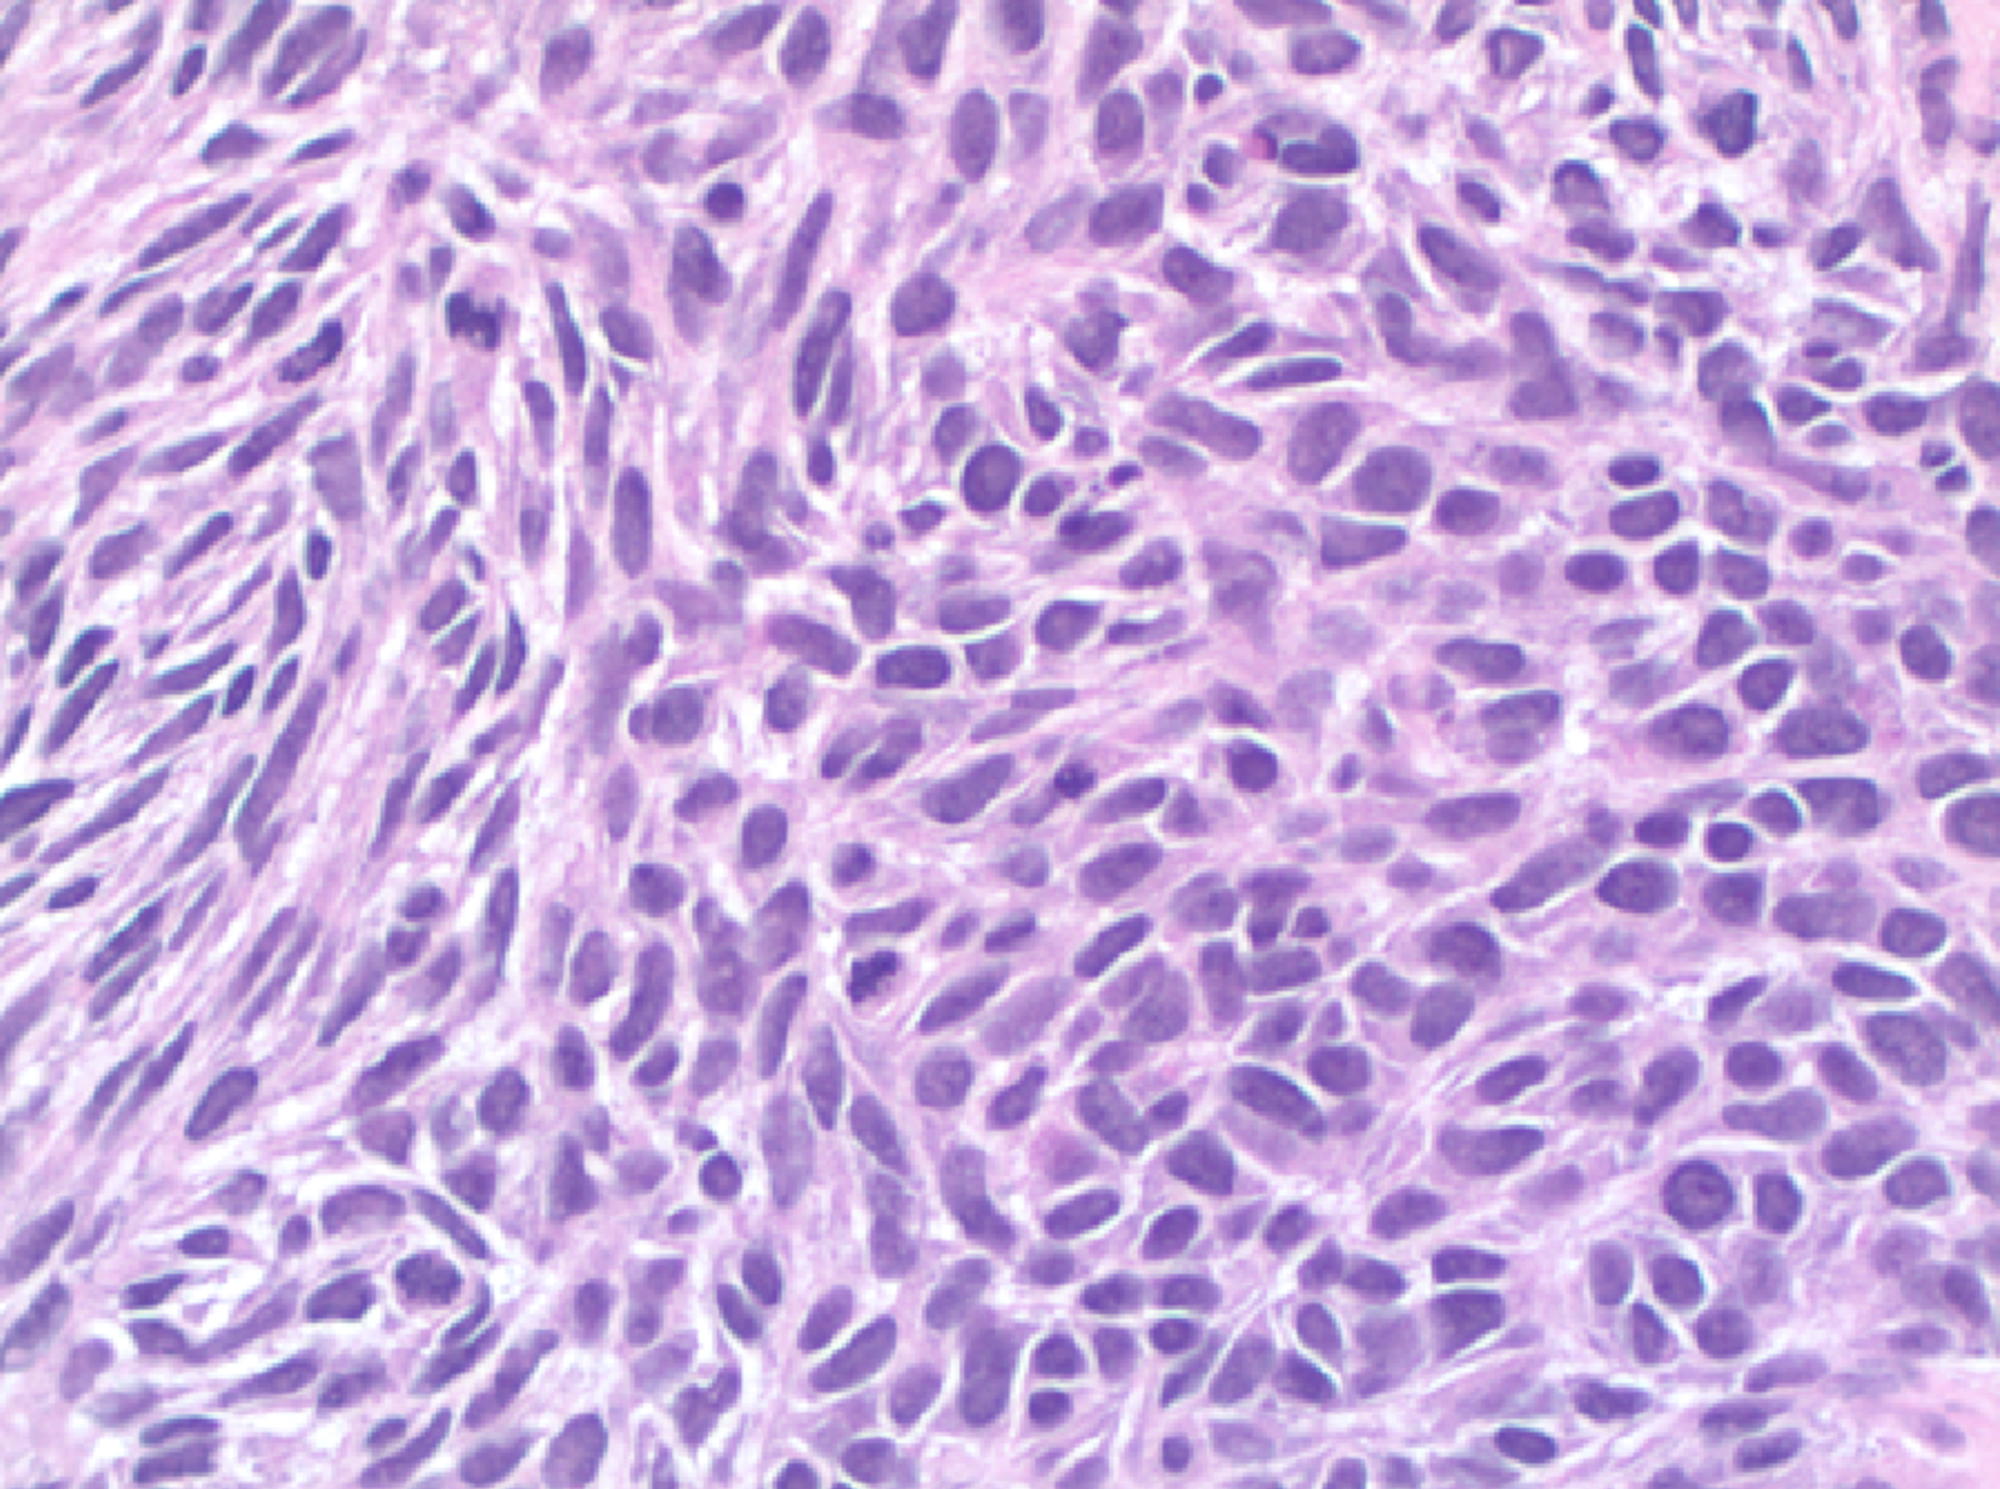 spindle cell sarcoma